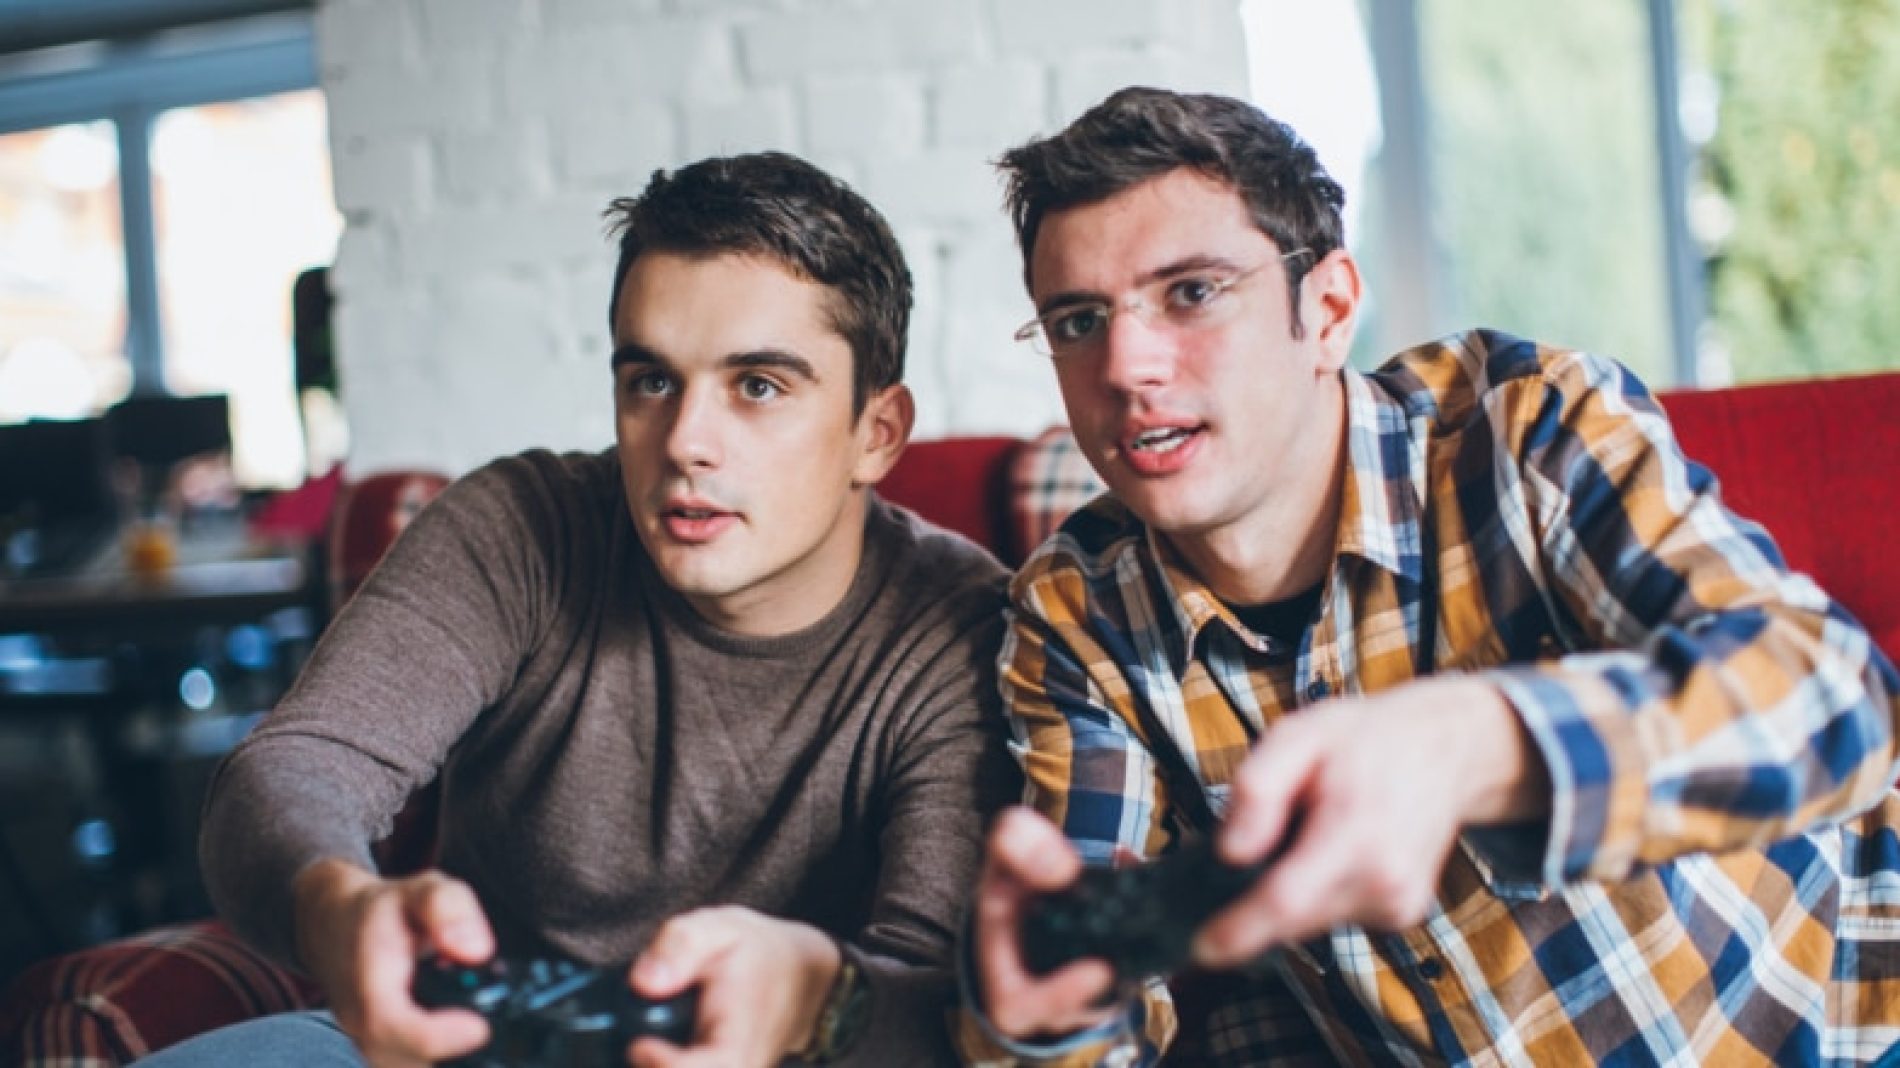 Two-young-people-playing-video-games-74wEsi